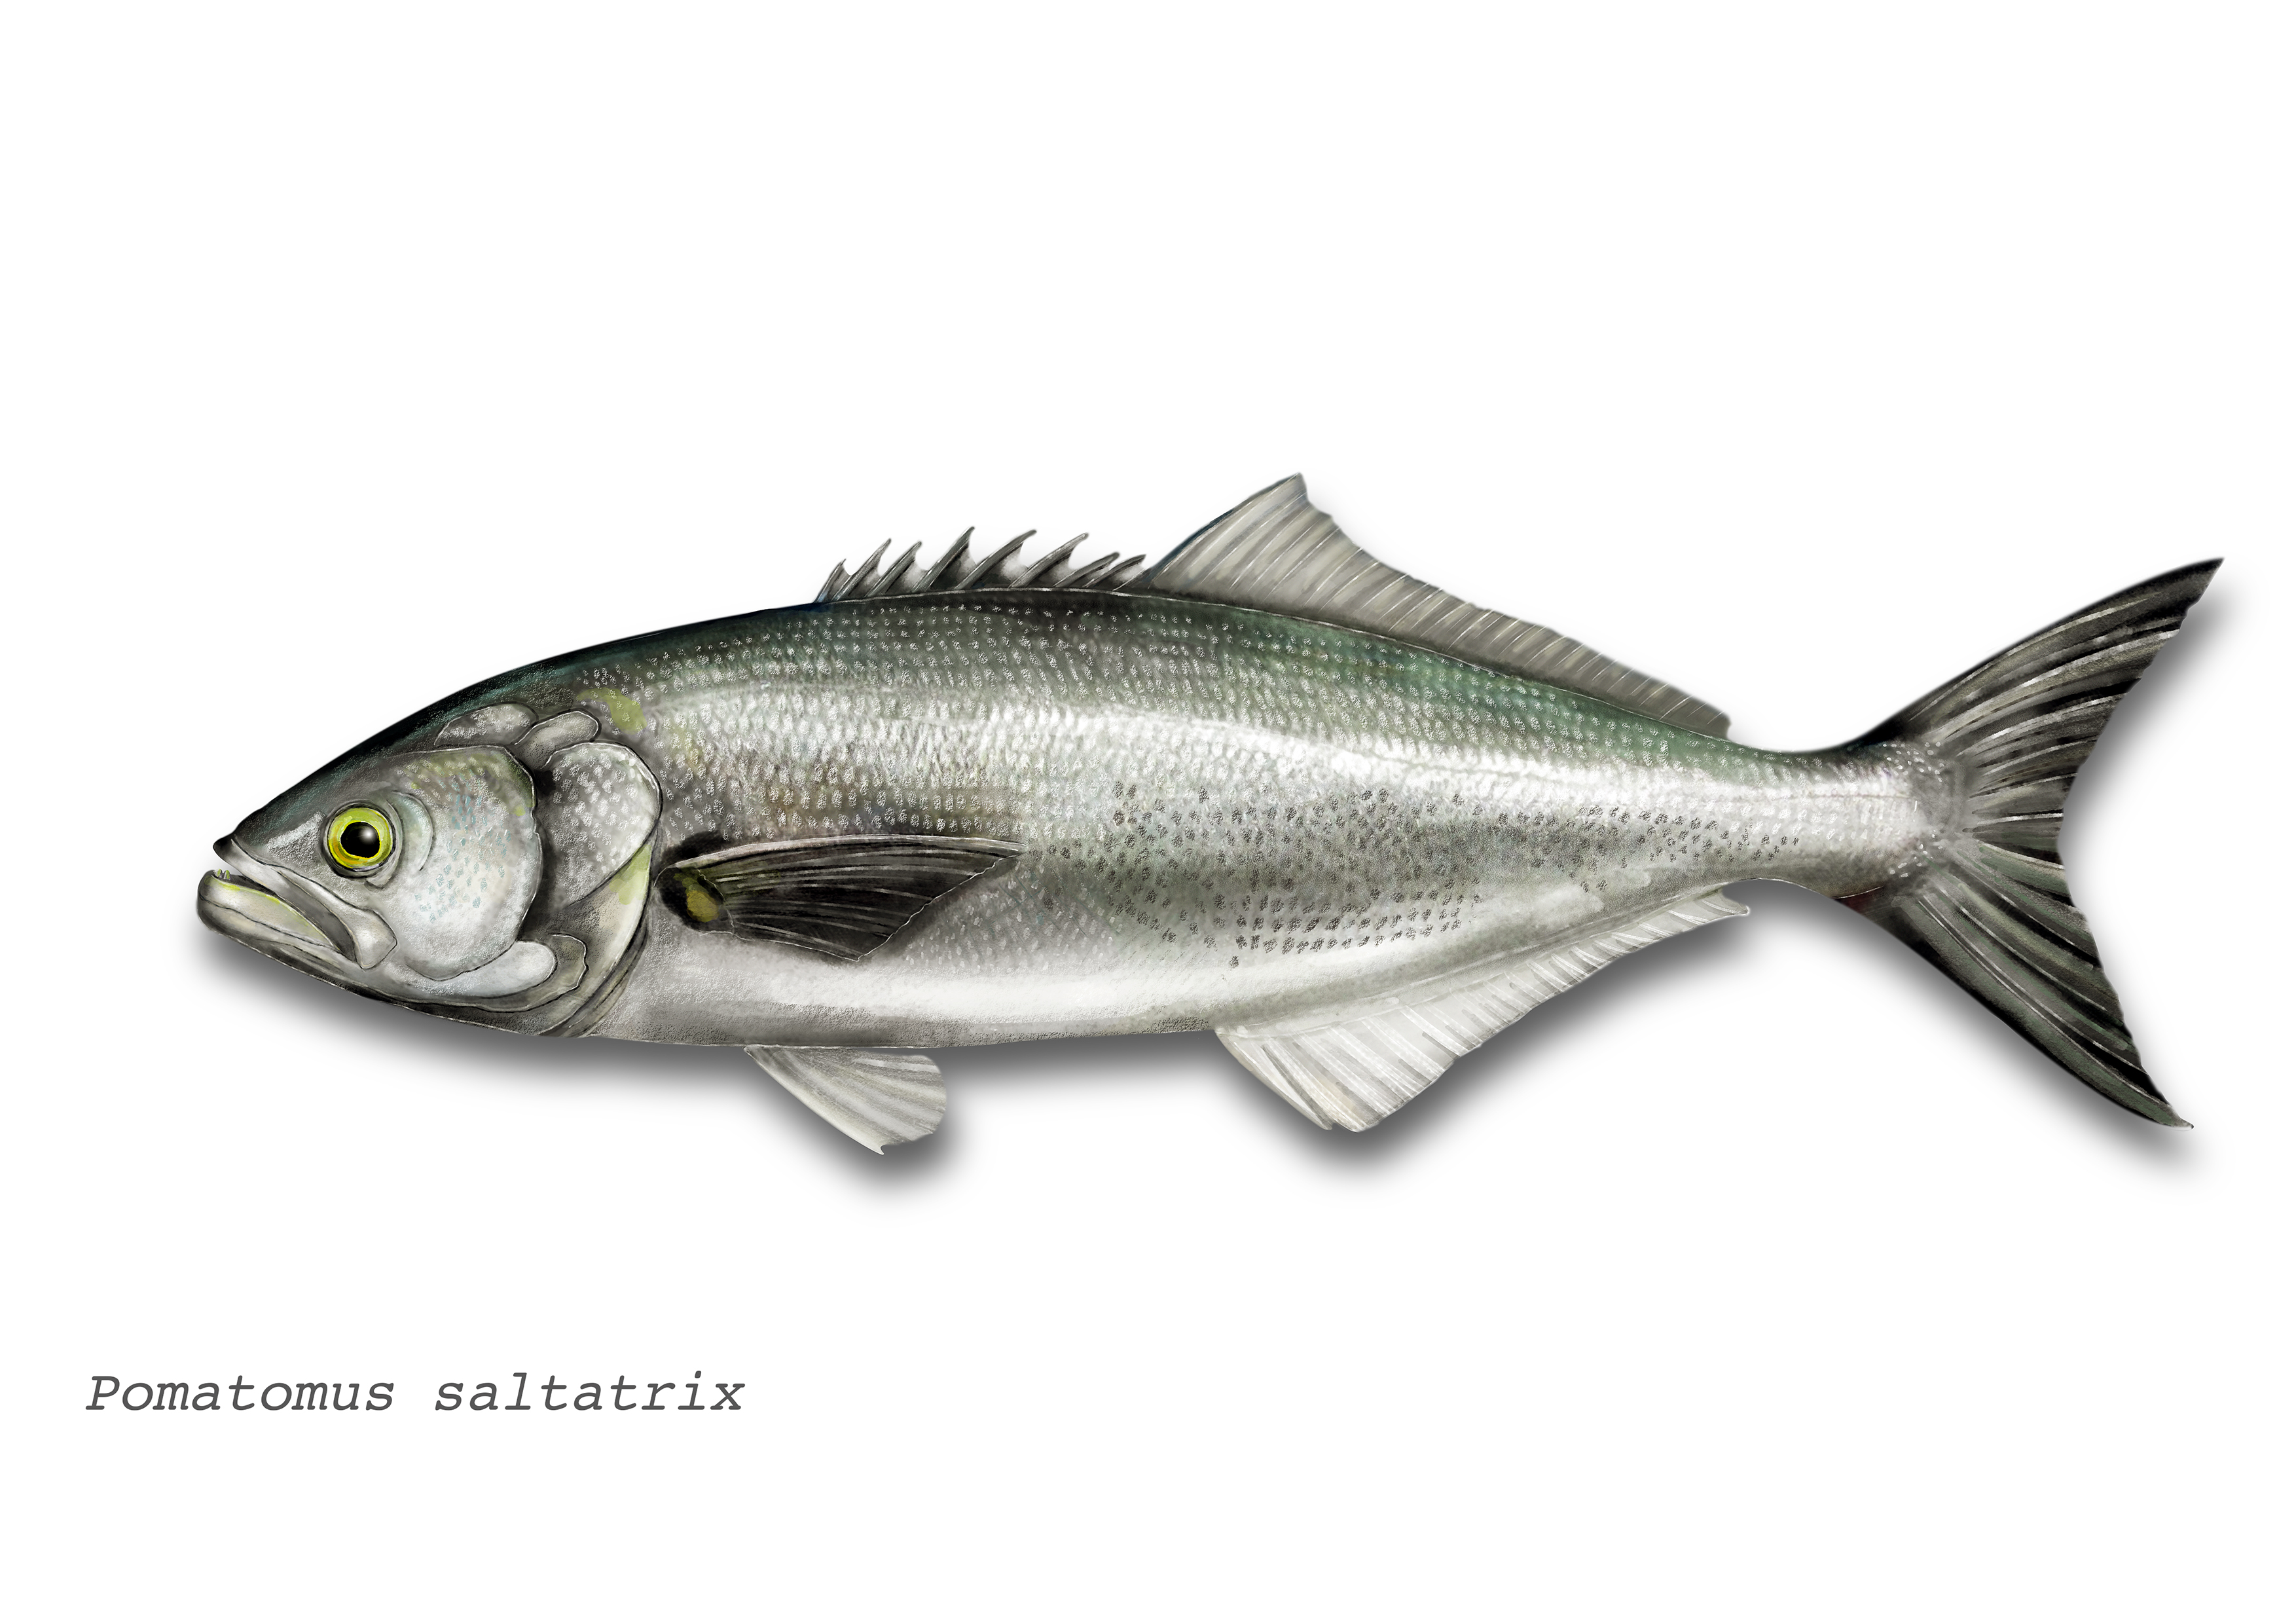 Example of fish species monitored for ciguatoxins - Bluefish